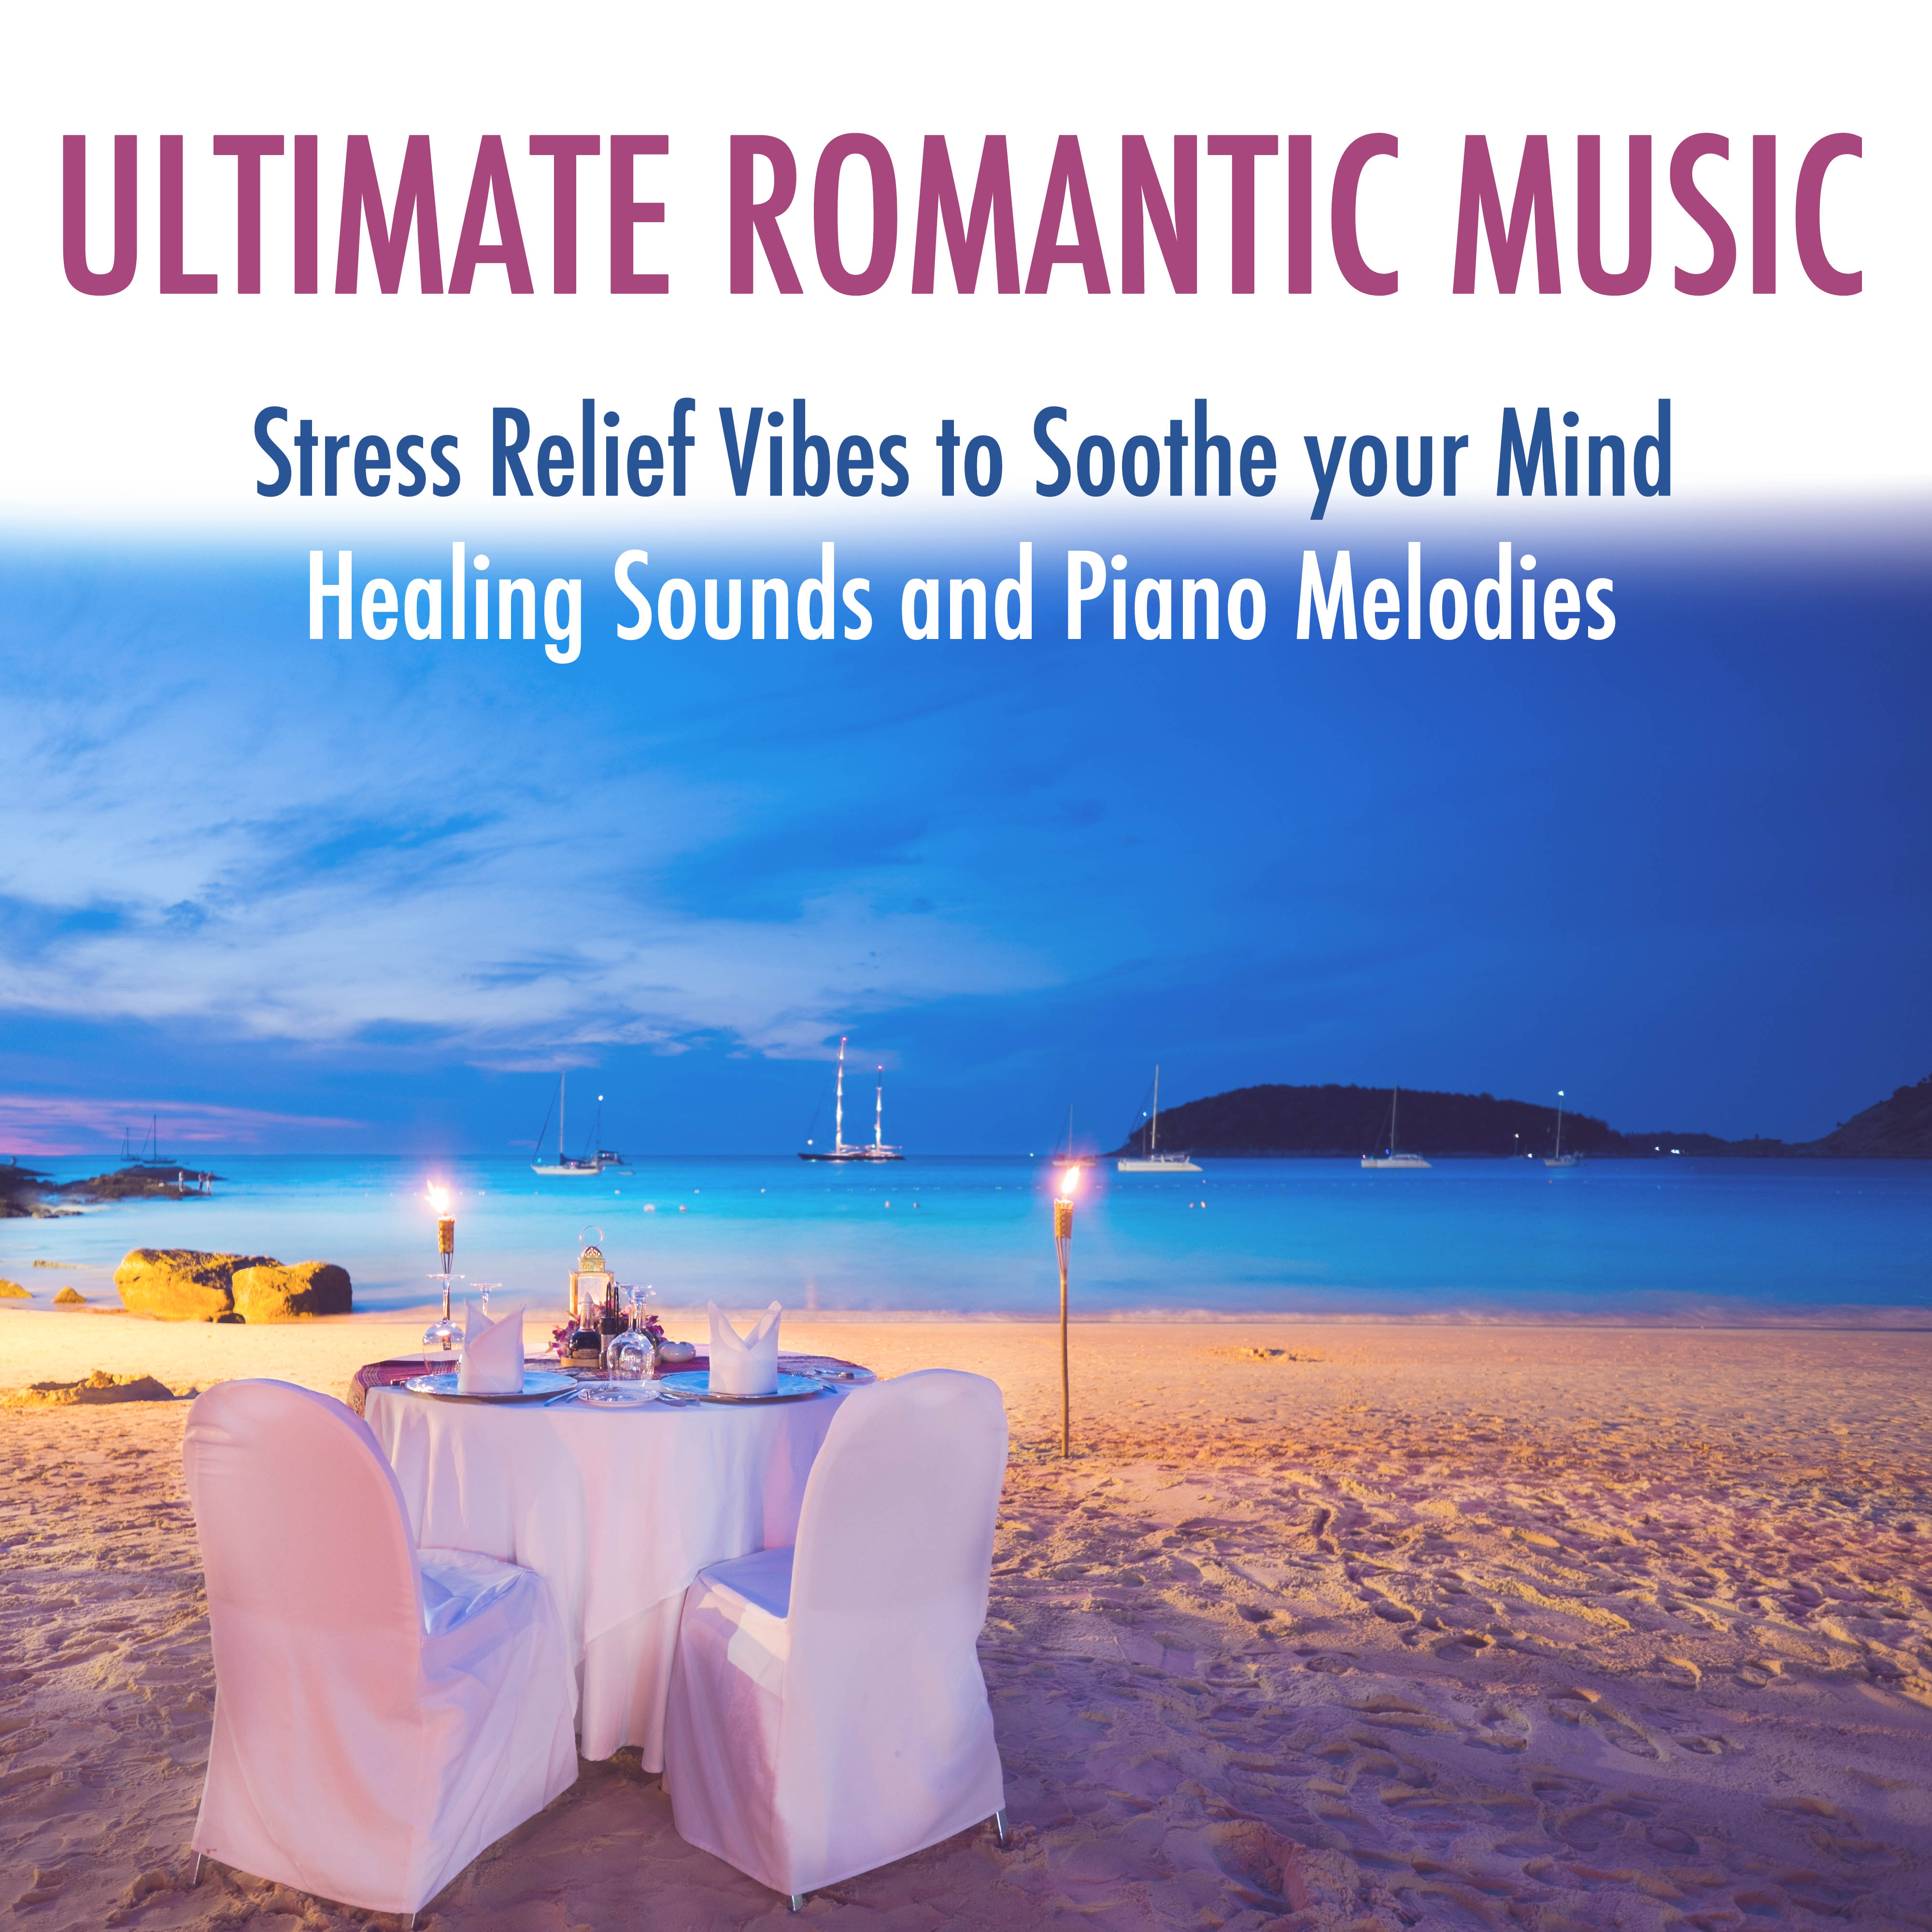 Ultimate Romantic Music: Stress Relief Vibes to Soothe your Mind with Healing Sounds and Piano Melodies